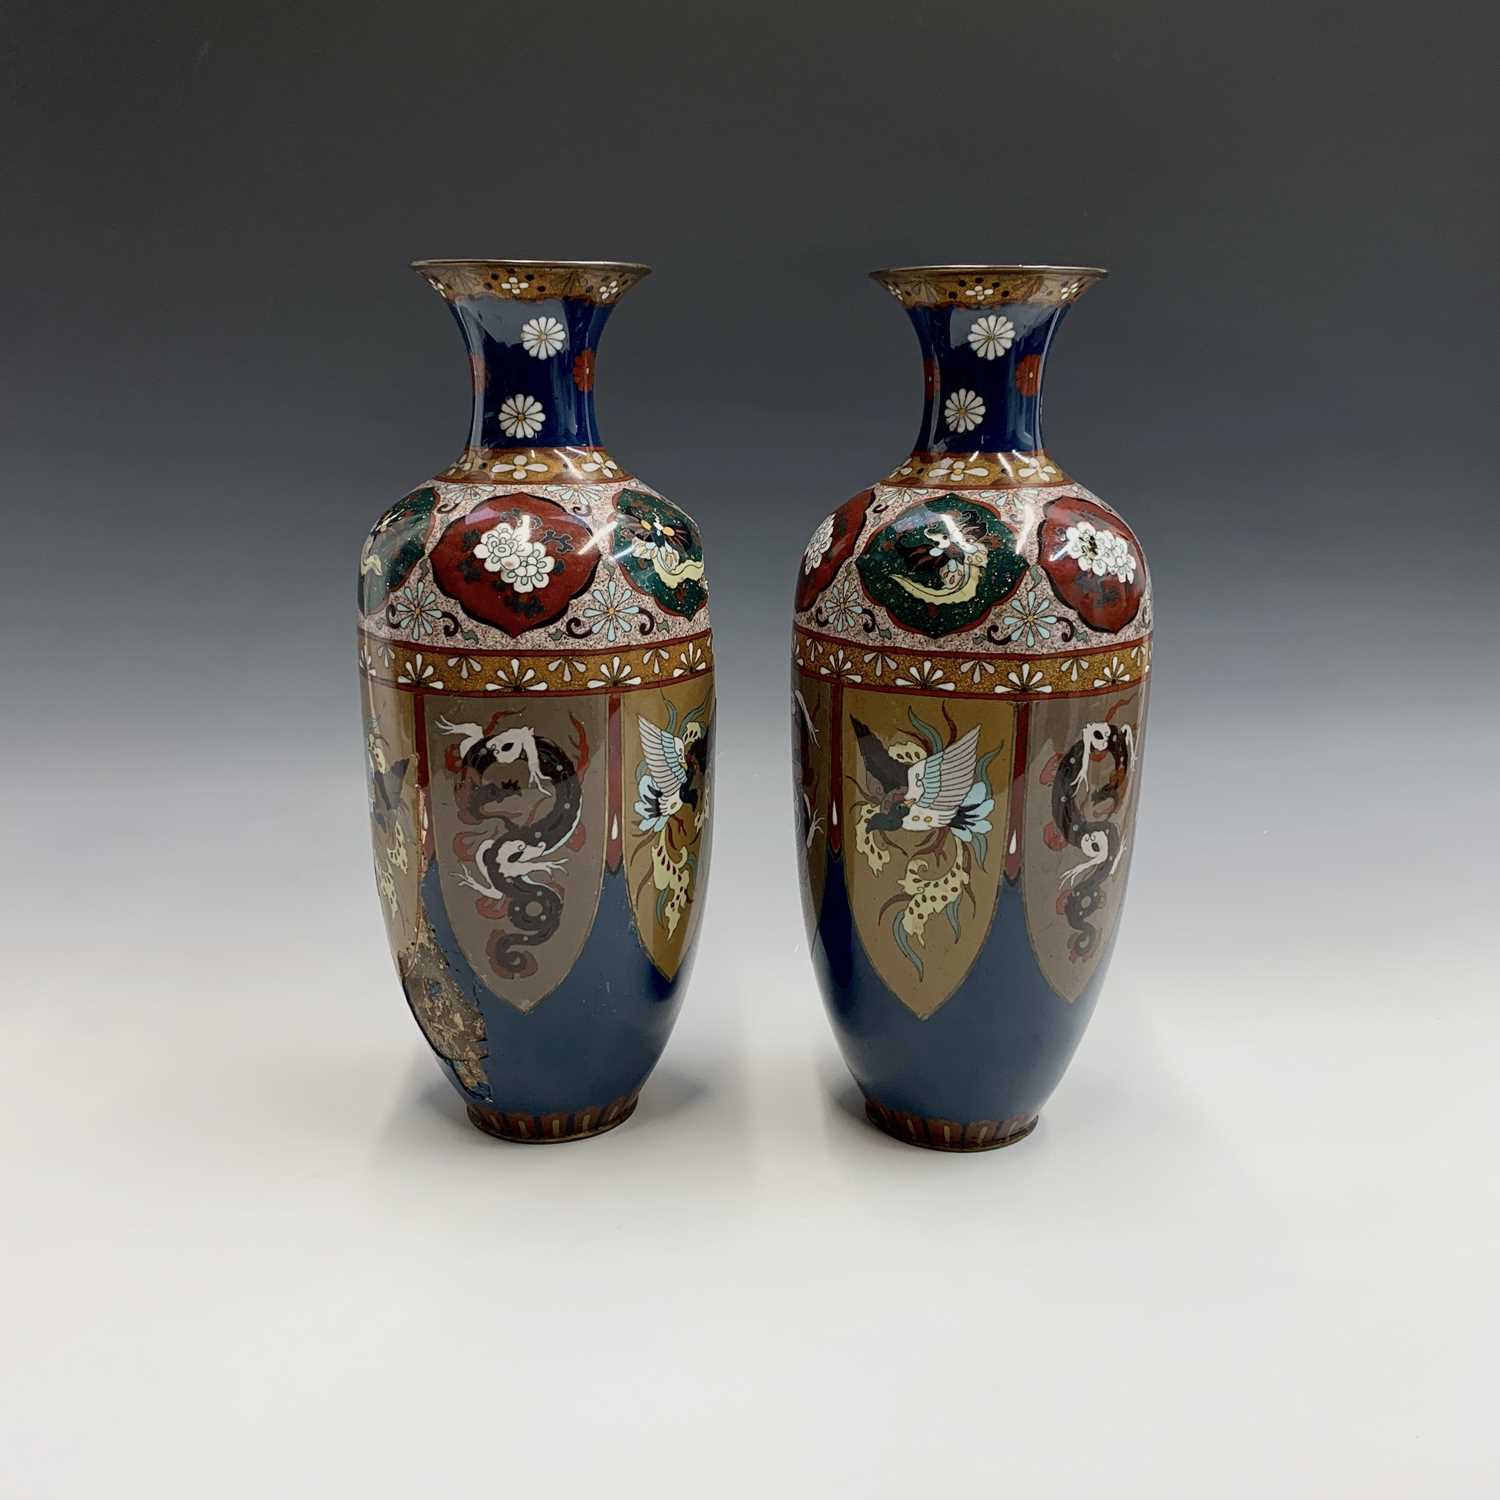 A pair of Japanese cloisonne vases, late 19th century, height 36cm.